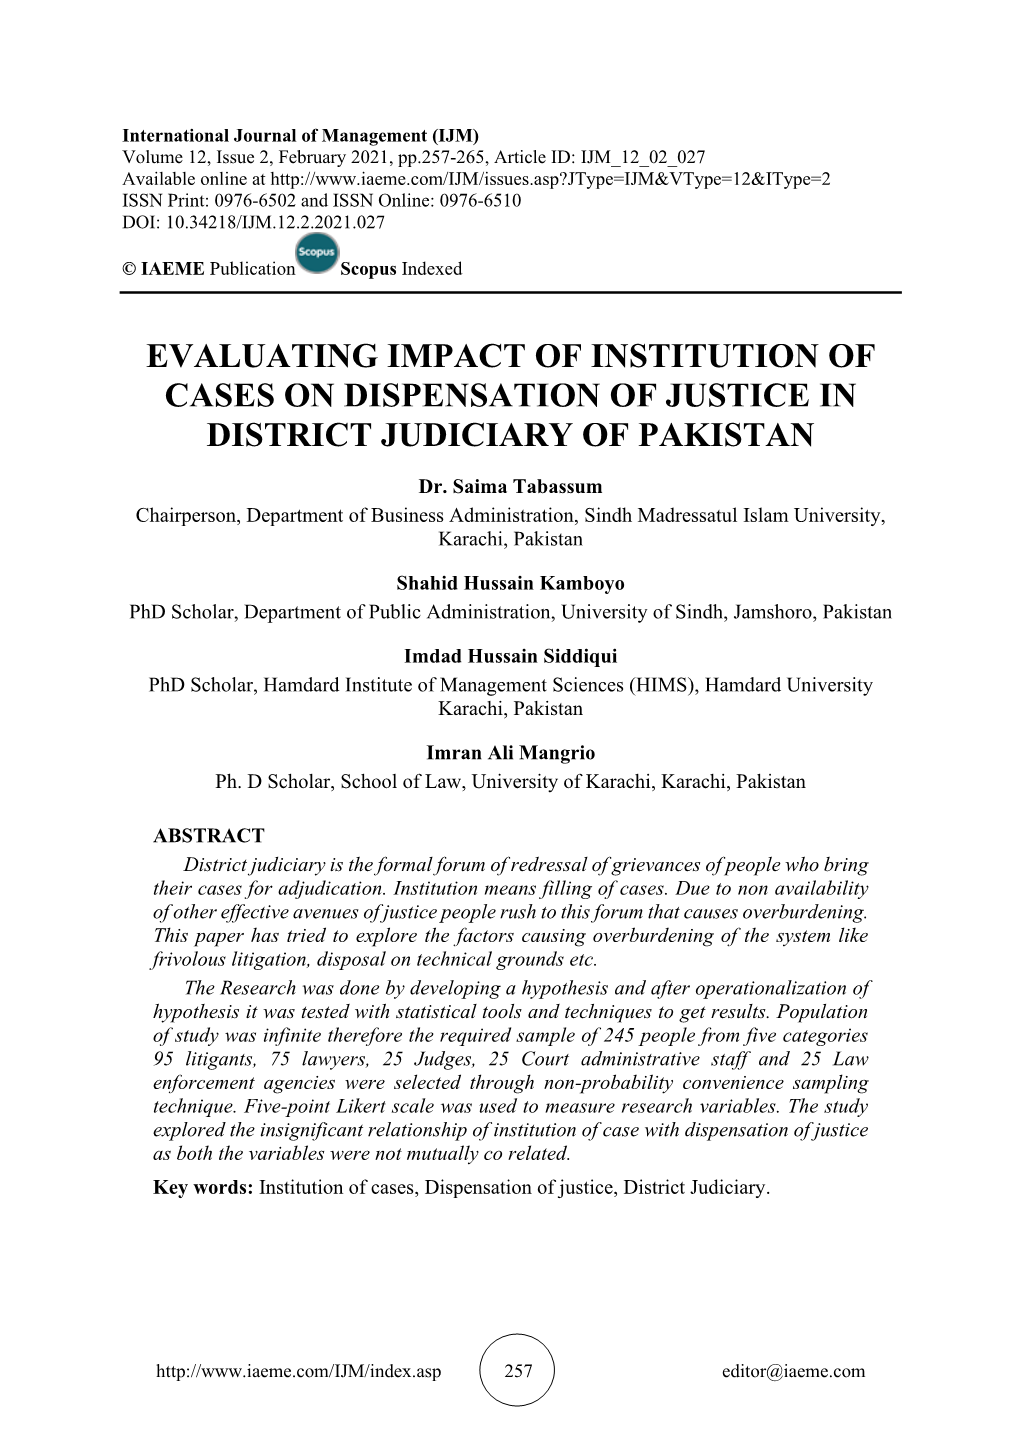 Evaluating Impact of Institution of Cases on Dispensation of Justice in District Judiciary of Pakistan